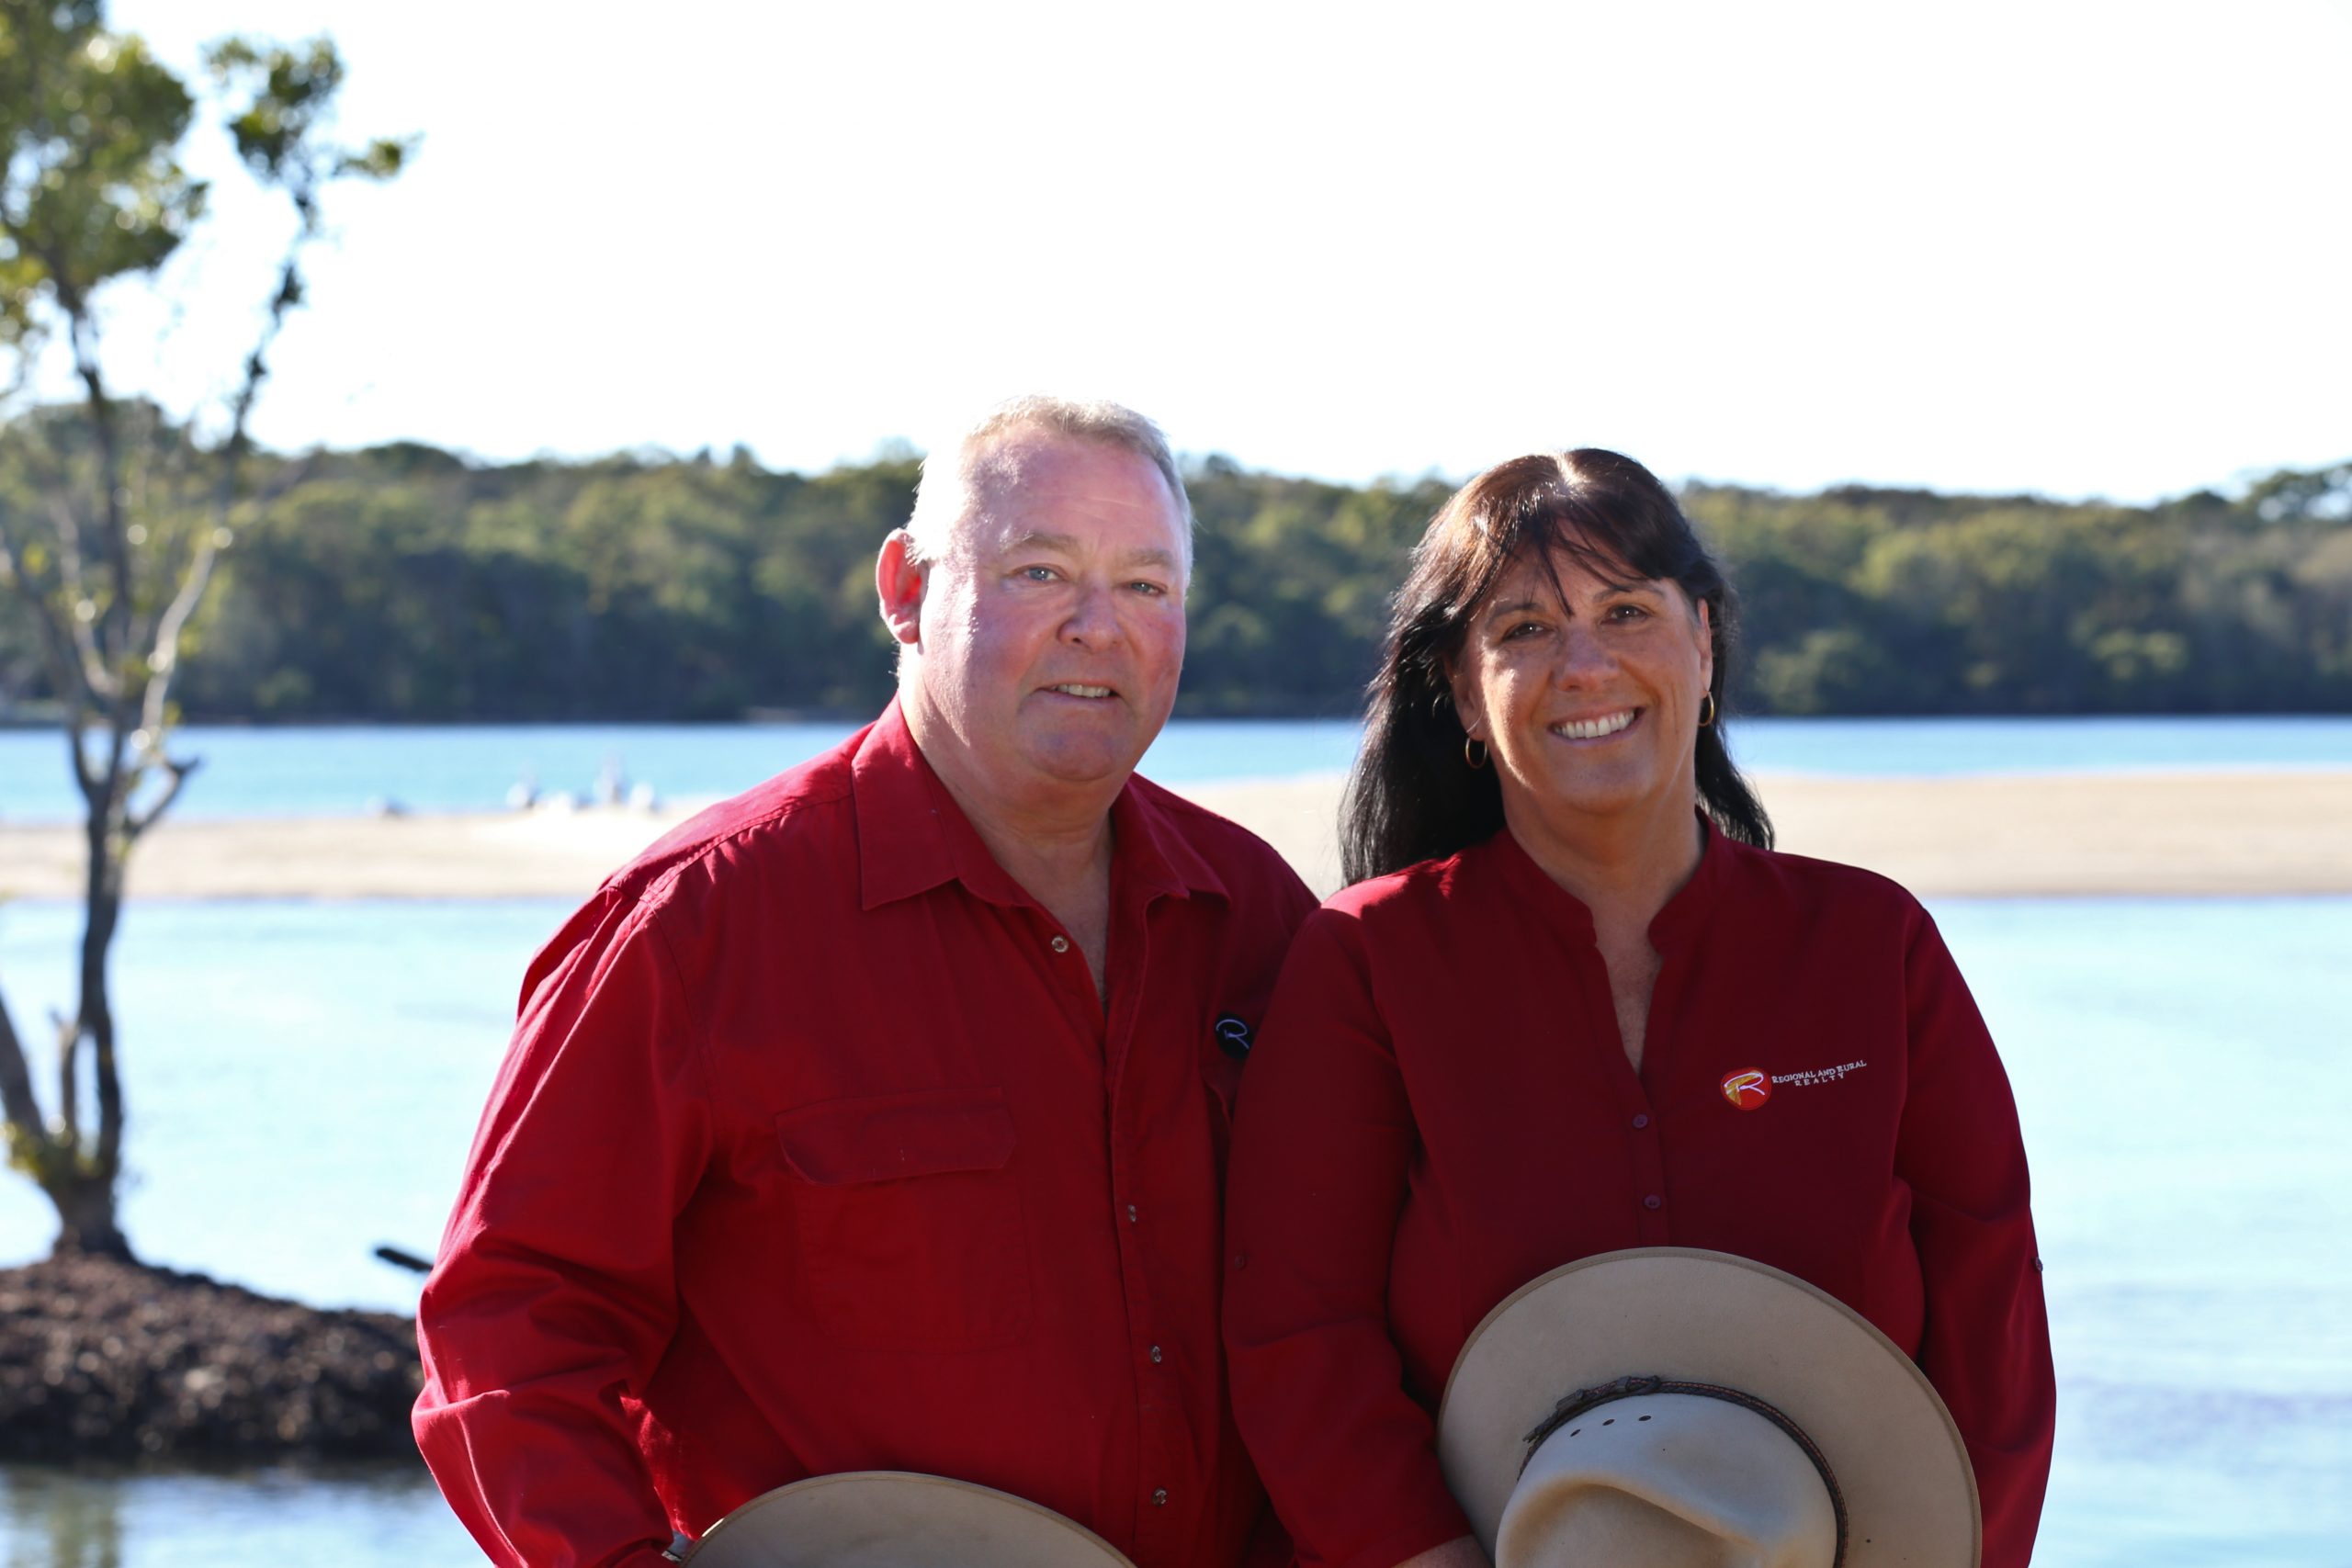 Drew Oliver and Janette Oliver of Regional and Rural Realty